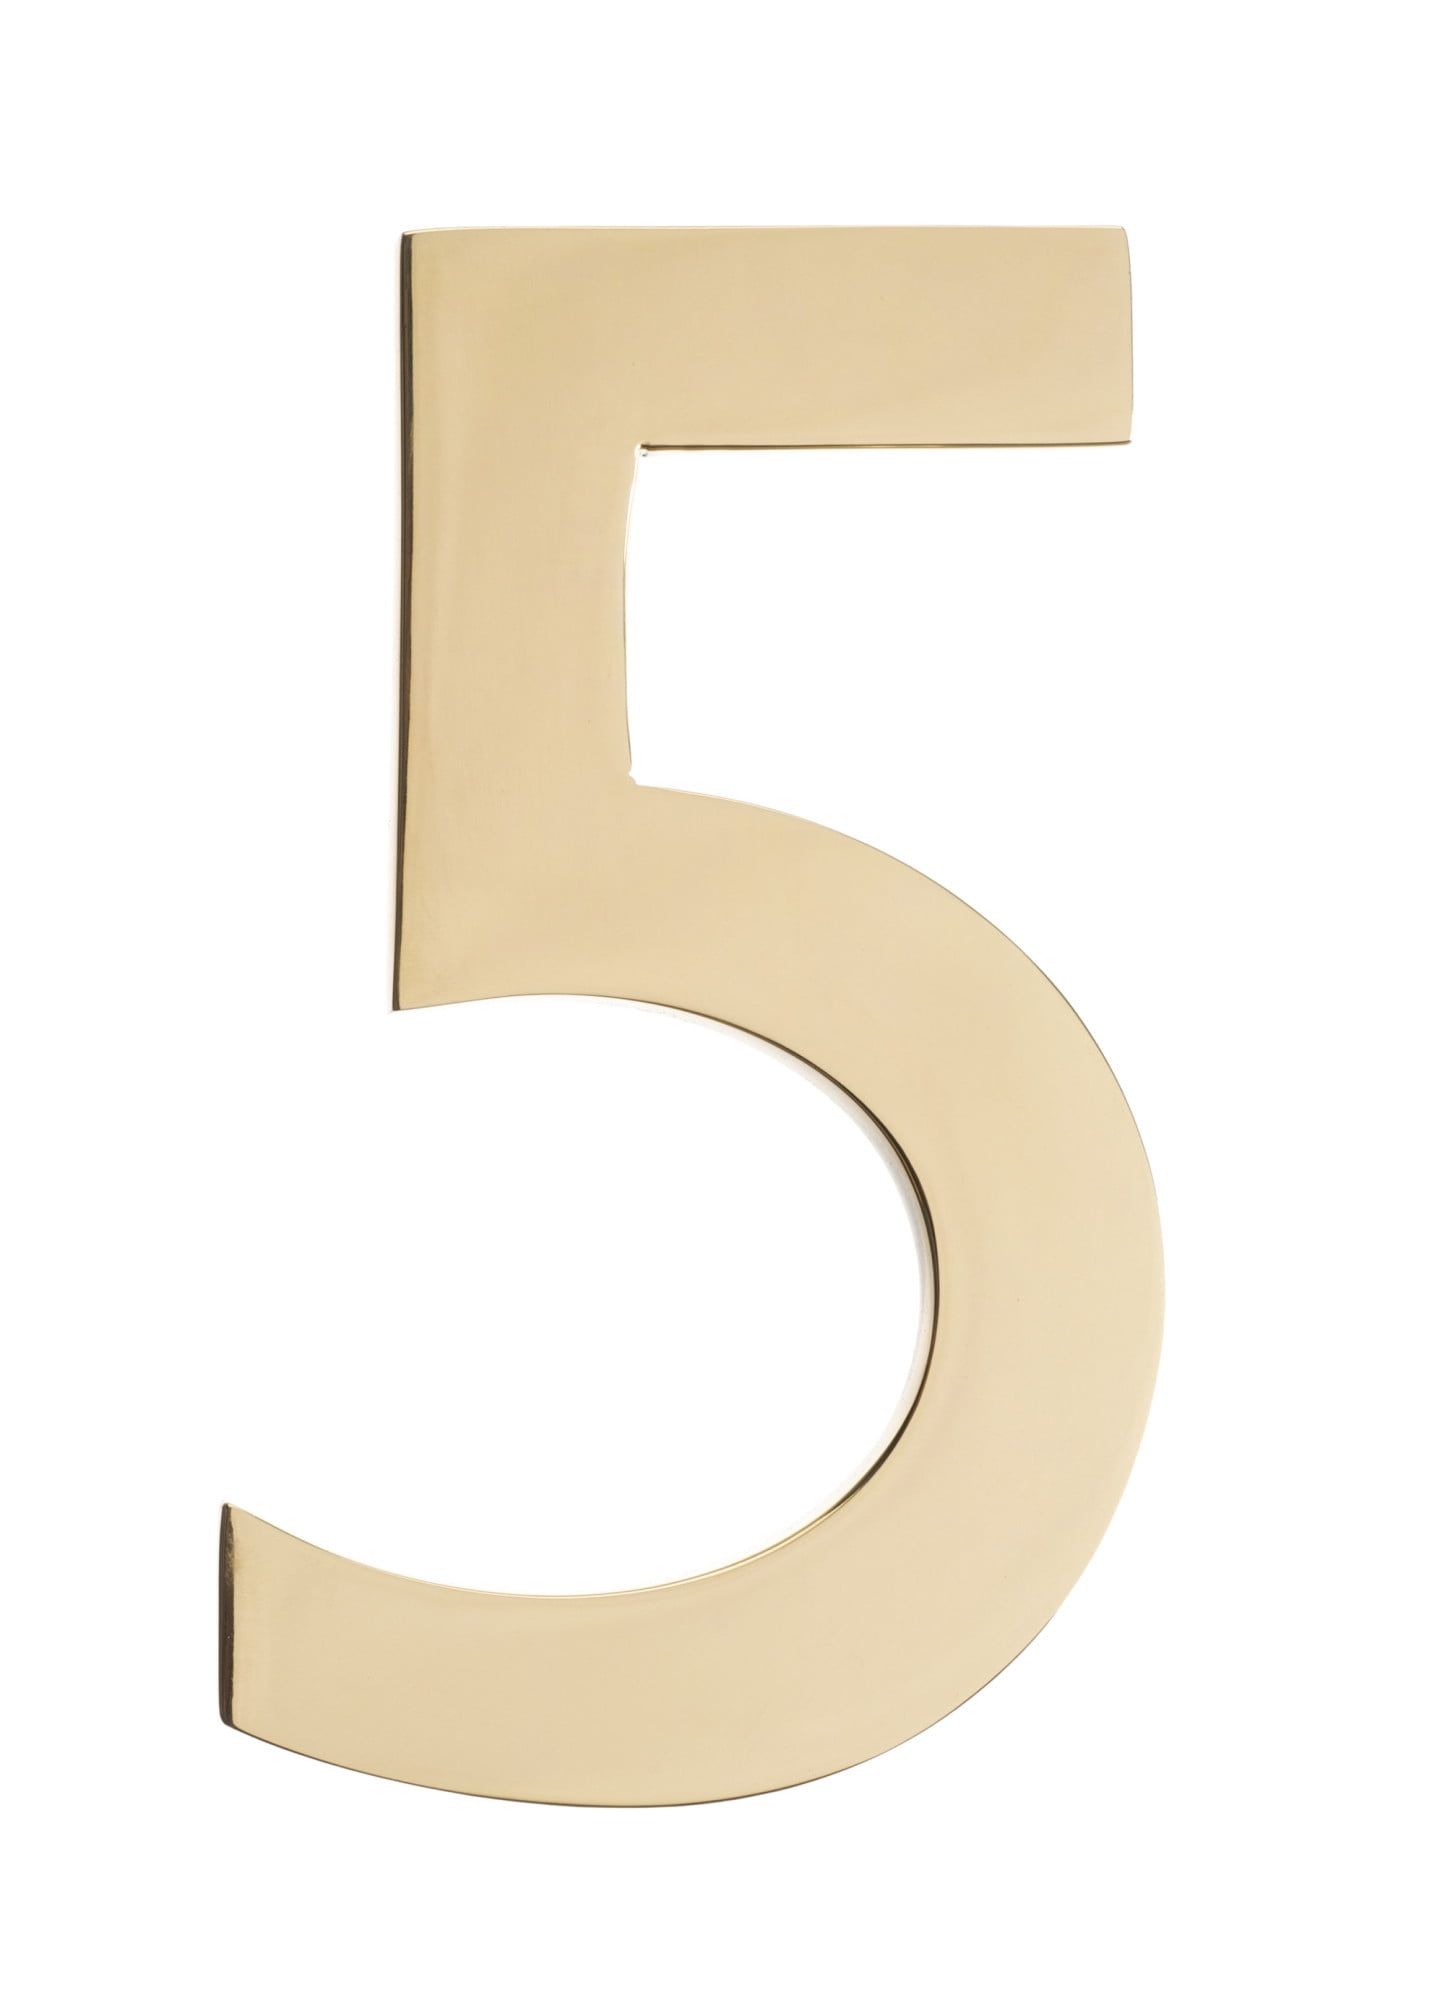 3585pb-5 House Number 5, Polished Brass - 5 In.